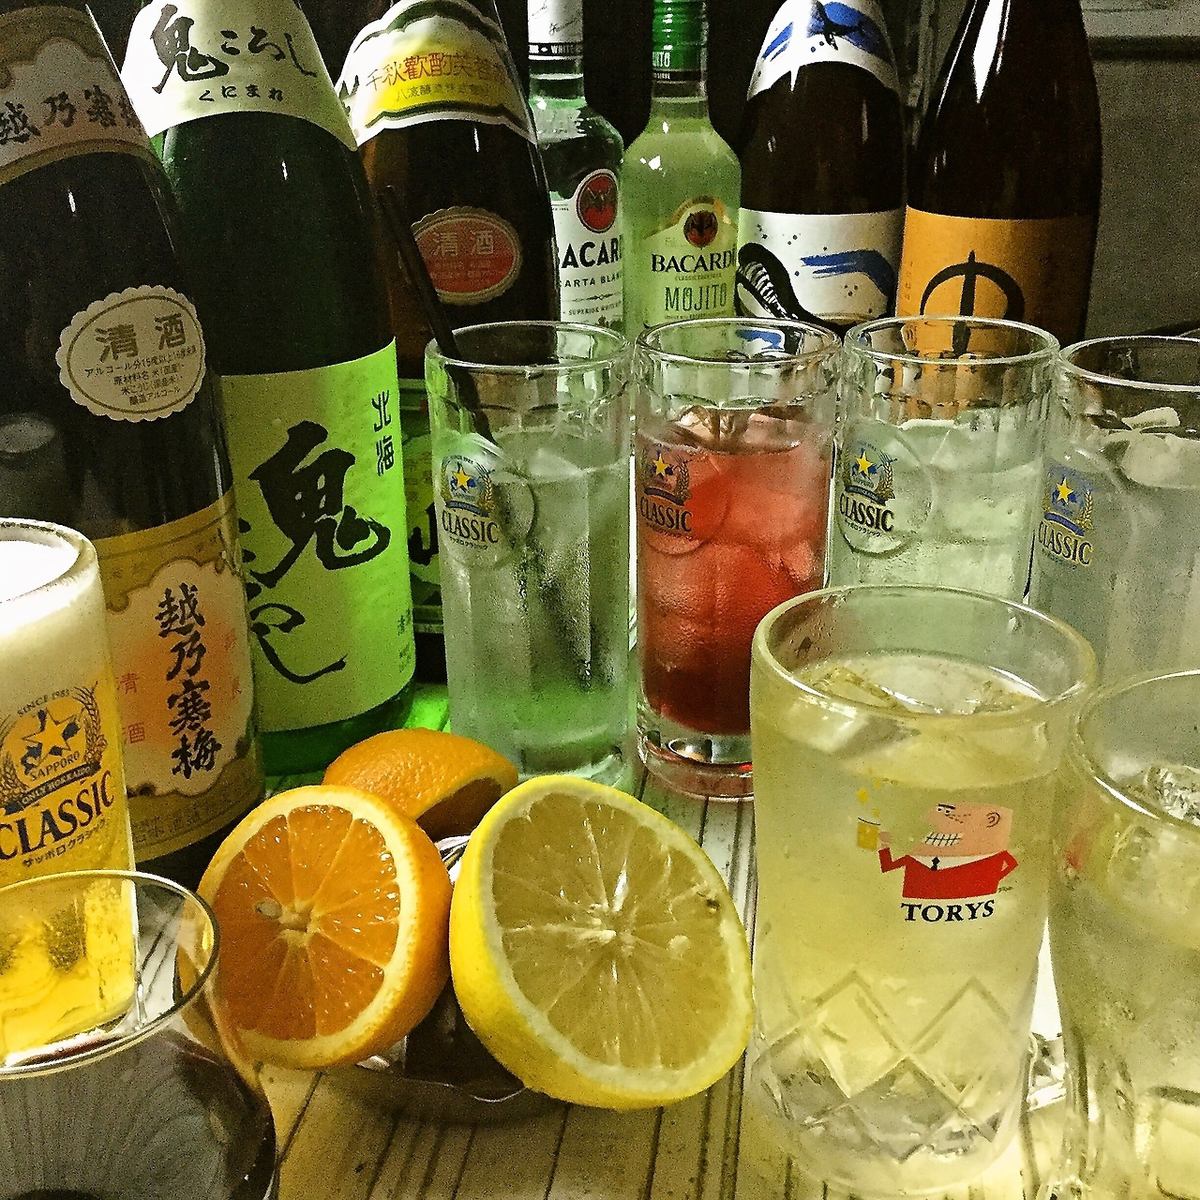 All-you-can-drink for 90 minutes with 80 kinds of draft beer and freshly squeezed beer for 1,078 JPY (incl. tax)!